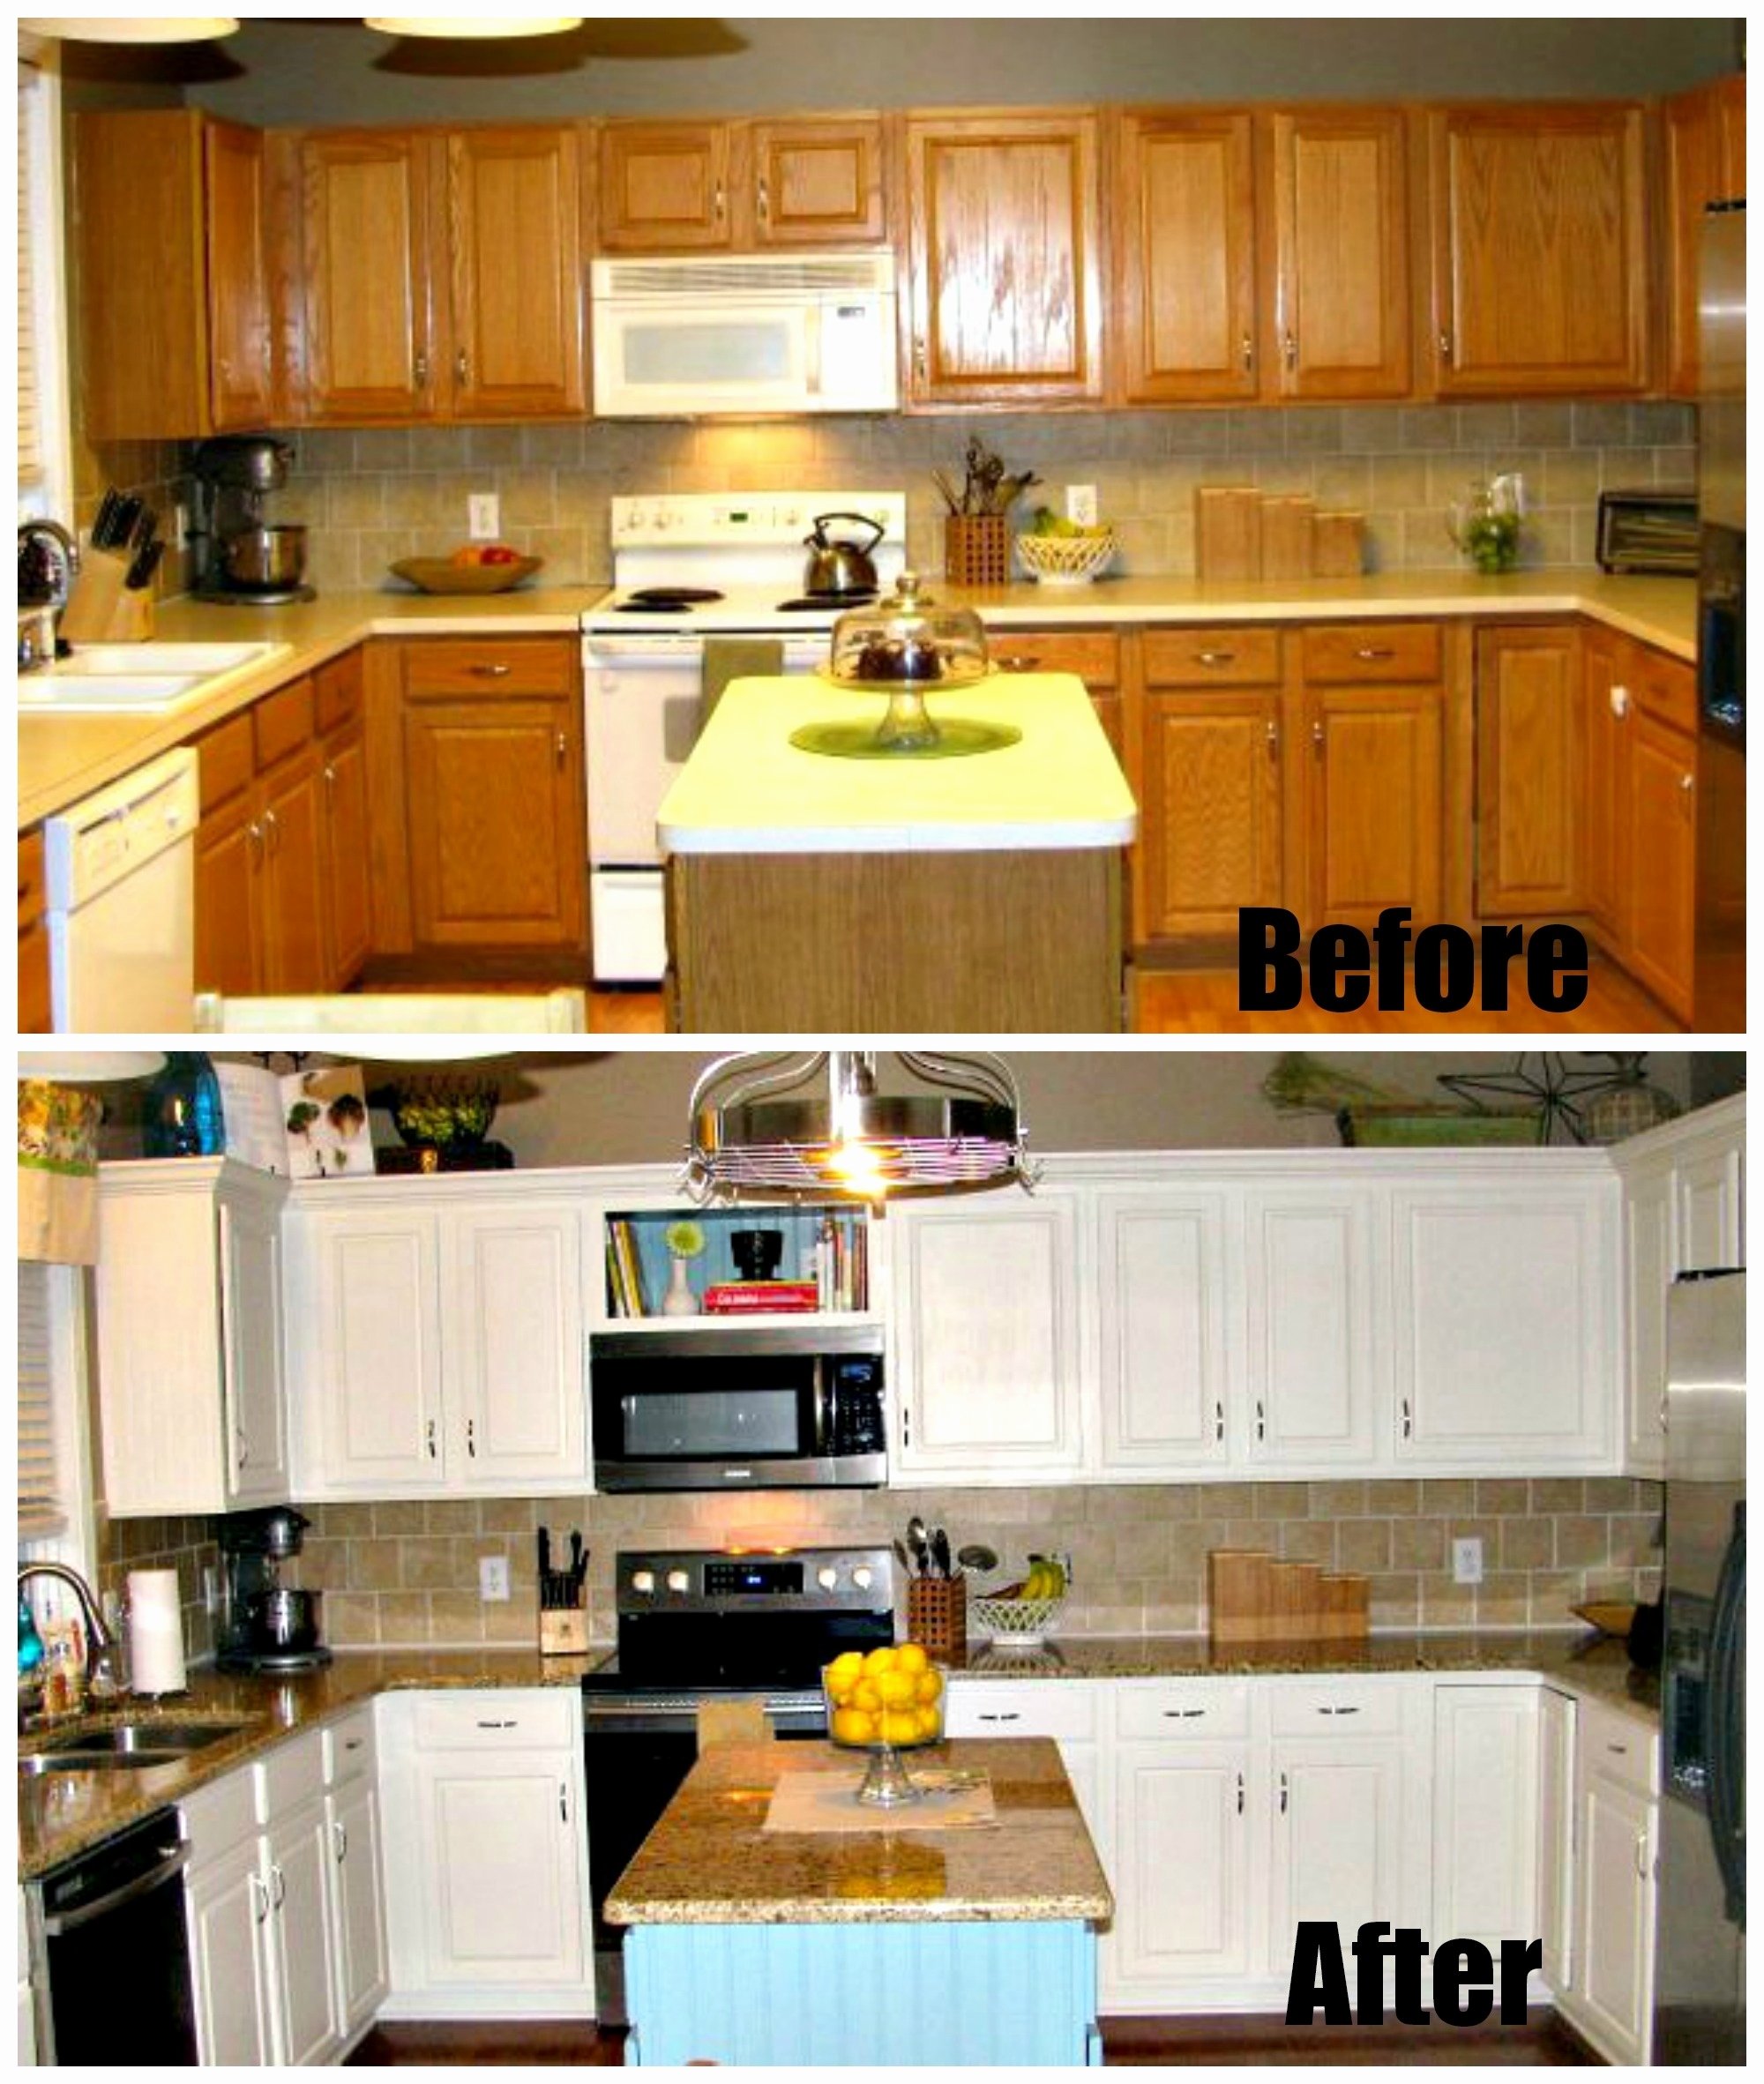 10 Lovely Kitchen Remodeling Ideas On A Small Budget 2020